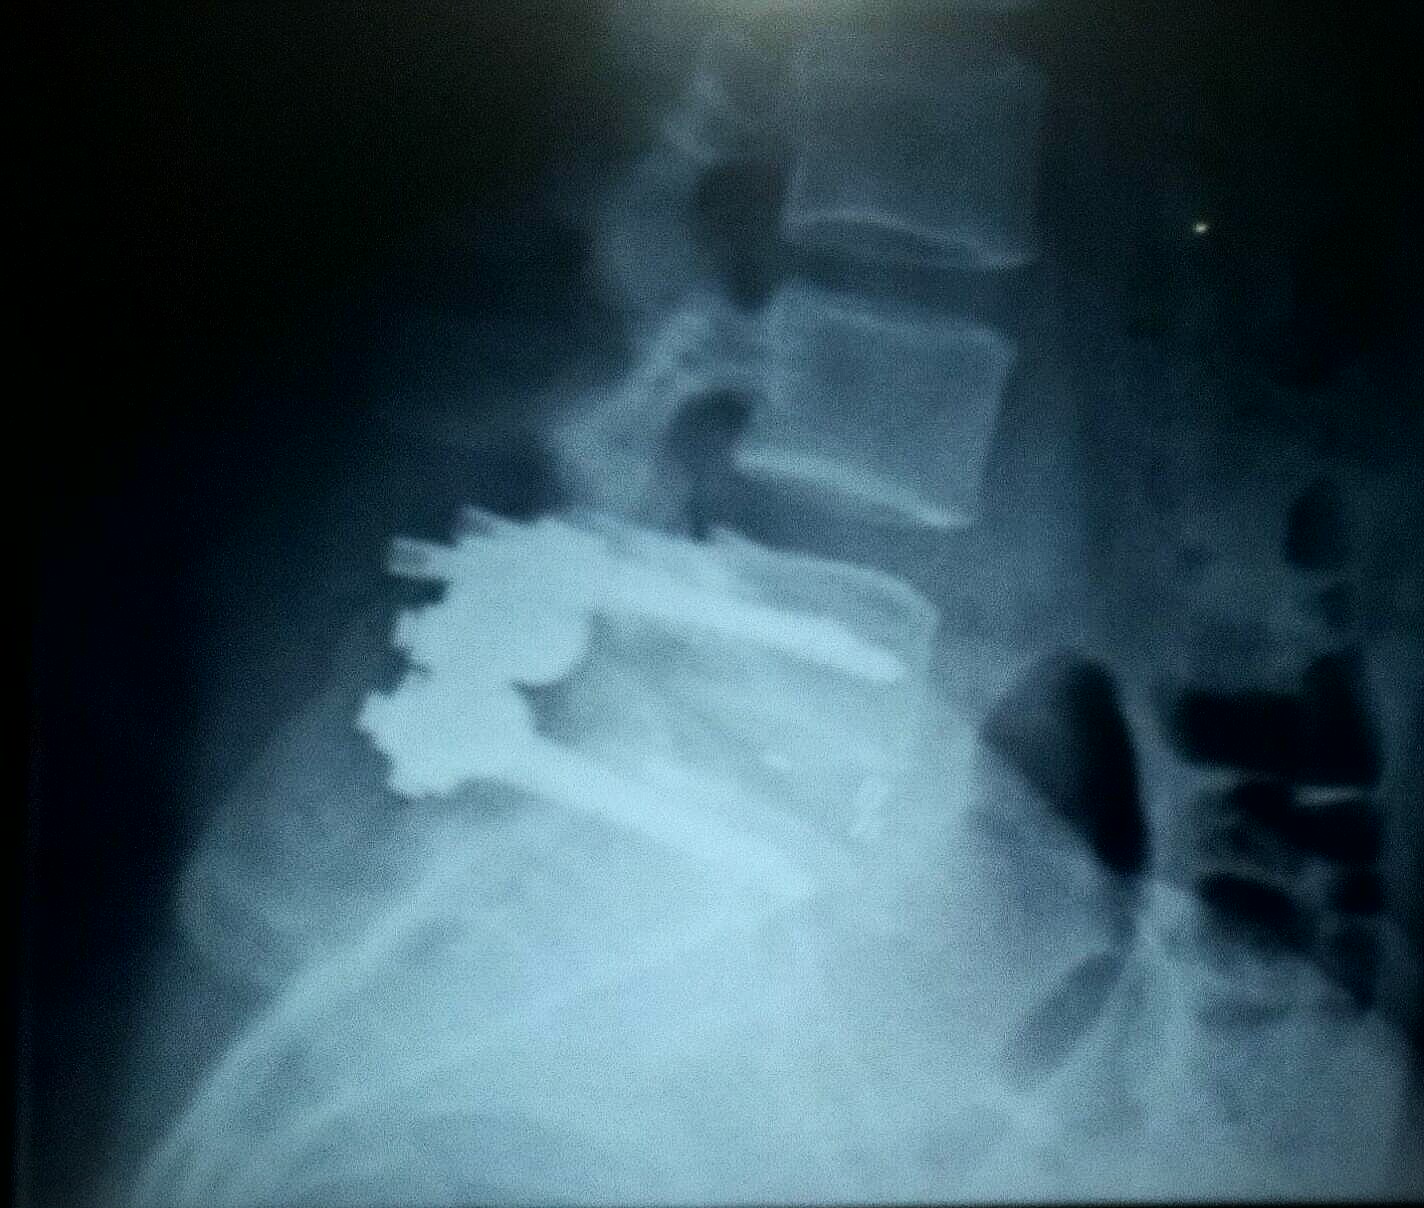 My L5 S1 Spinal Fusion 1st Set Of X Rays Second Post Op Visit W Surgeon And Pictures